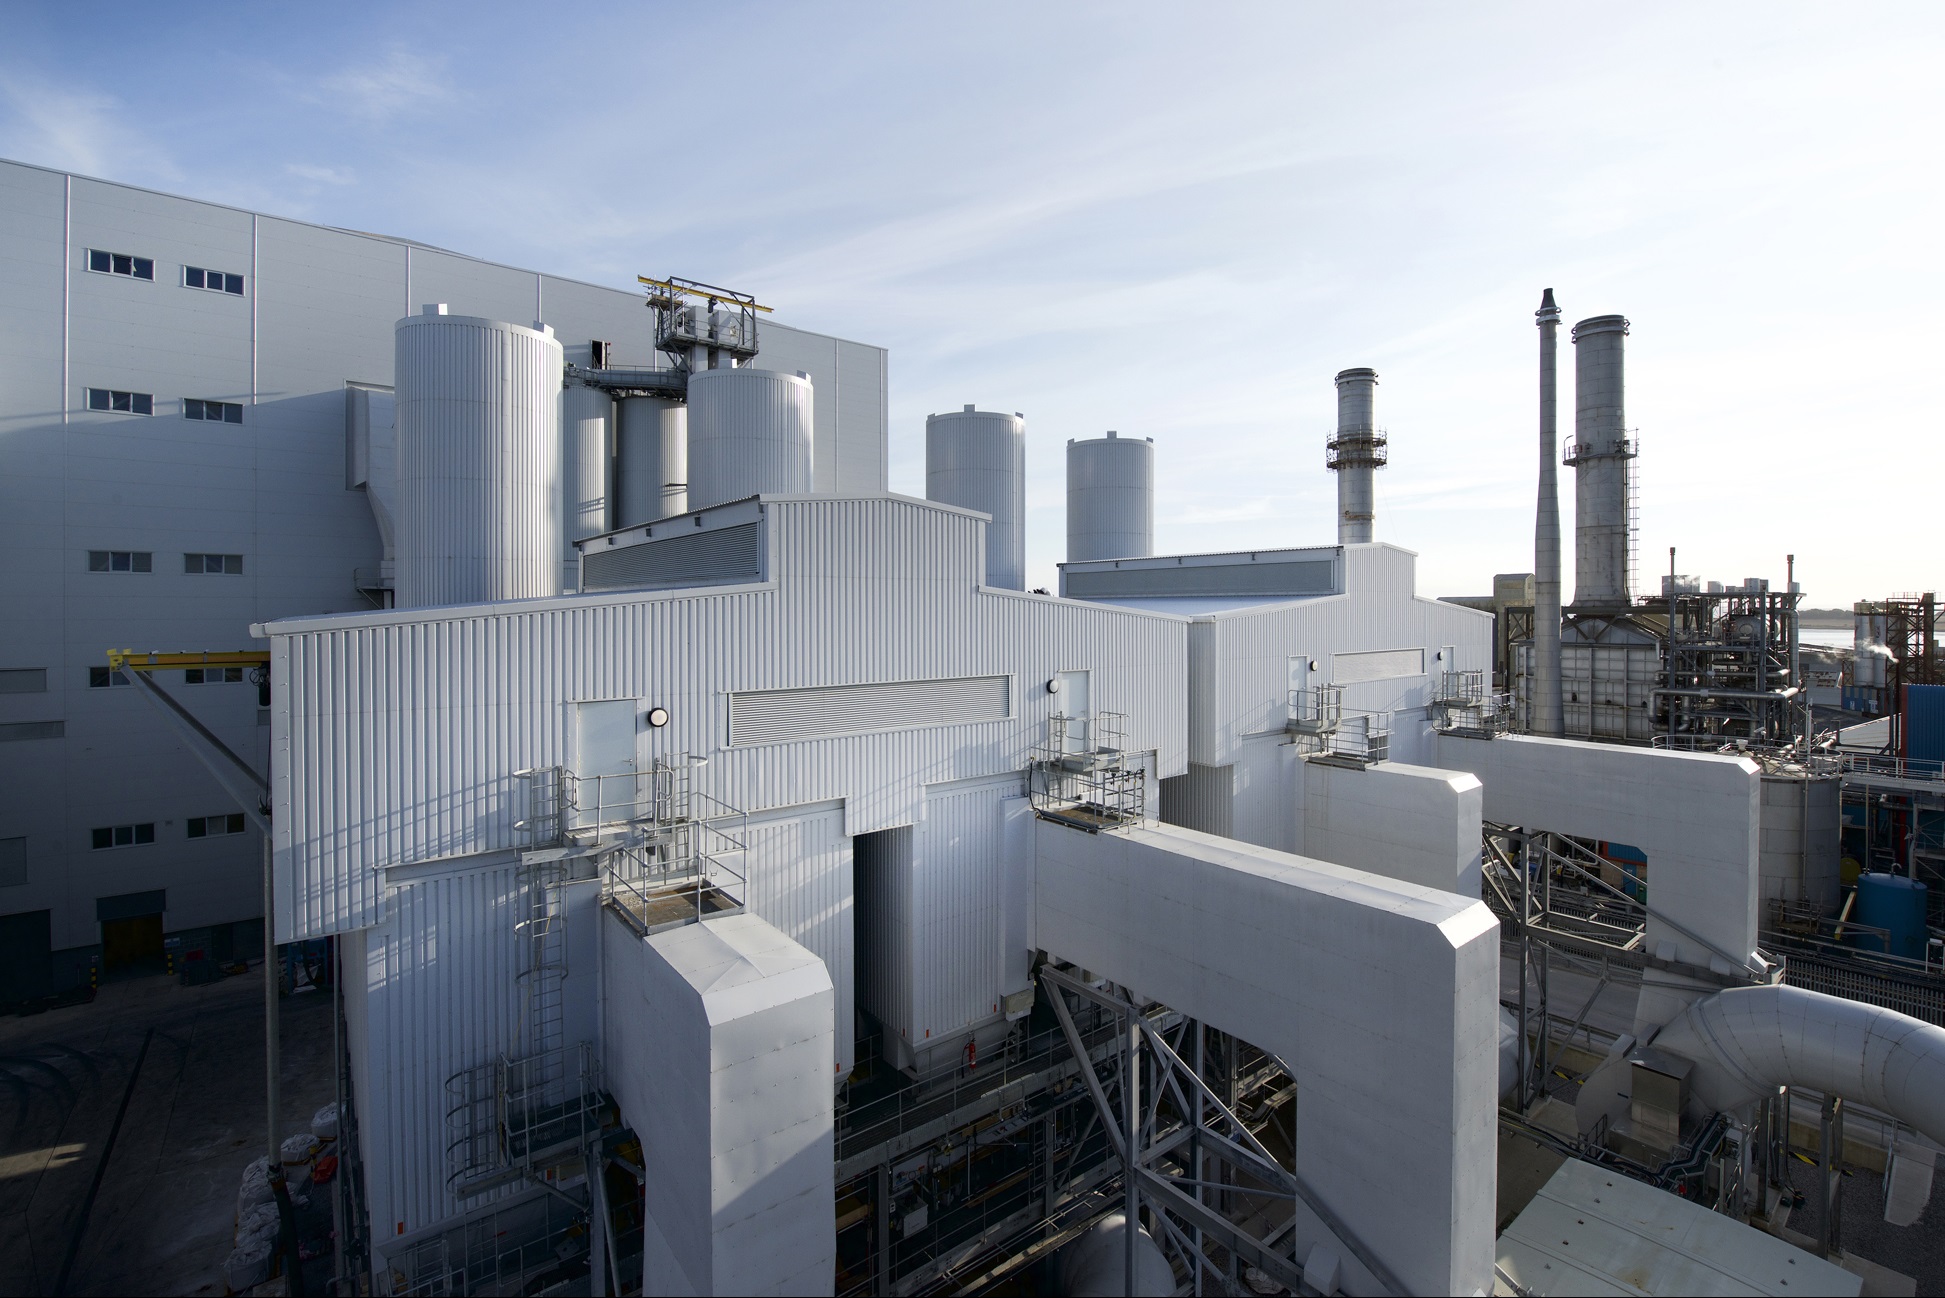 Technip Energies Selected by Viridor to perform FEED on the Runcorn Energy-from-Waste Carbon Capture Project in the United Kingdom